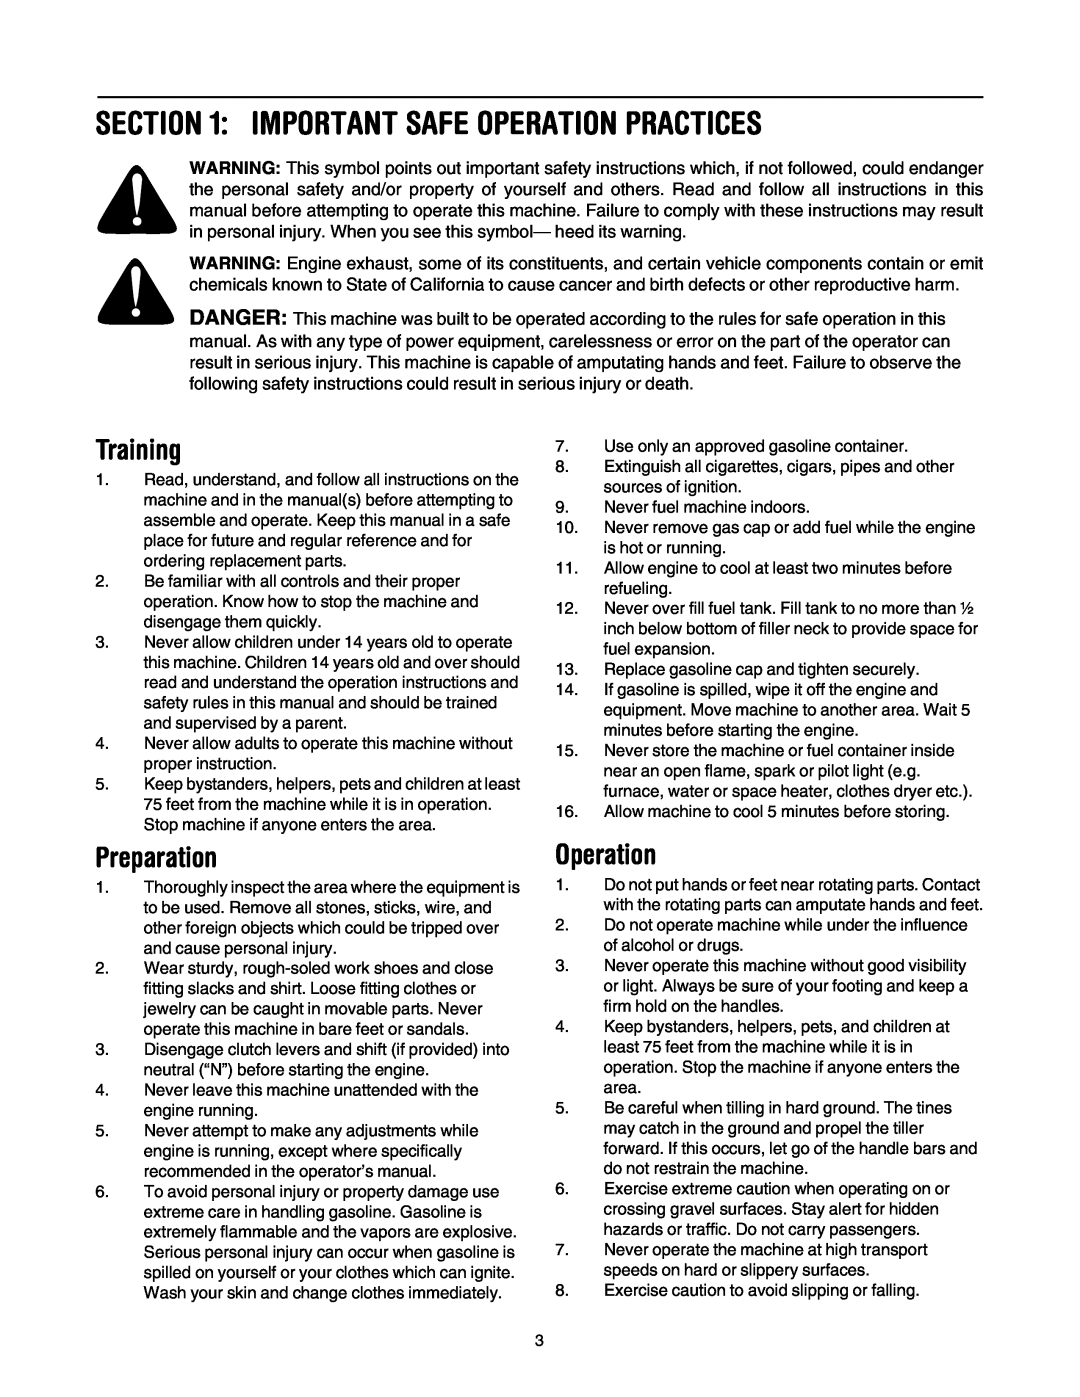 MTD 393 manual Important Safe Operation Practices, Training, Preparation 